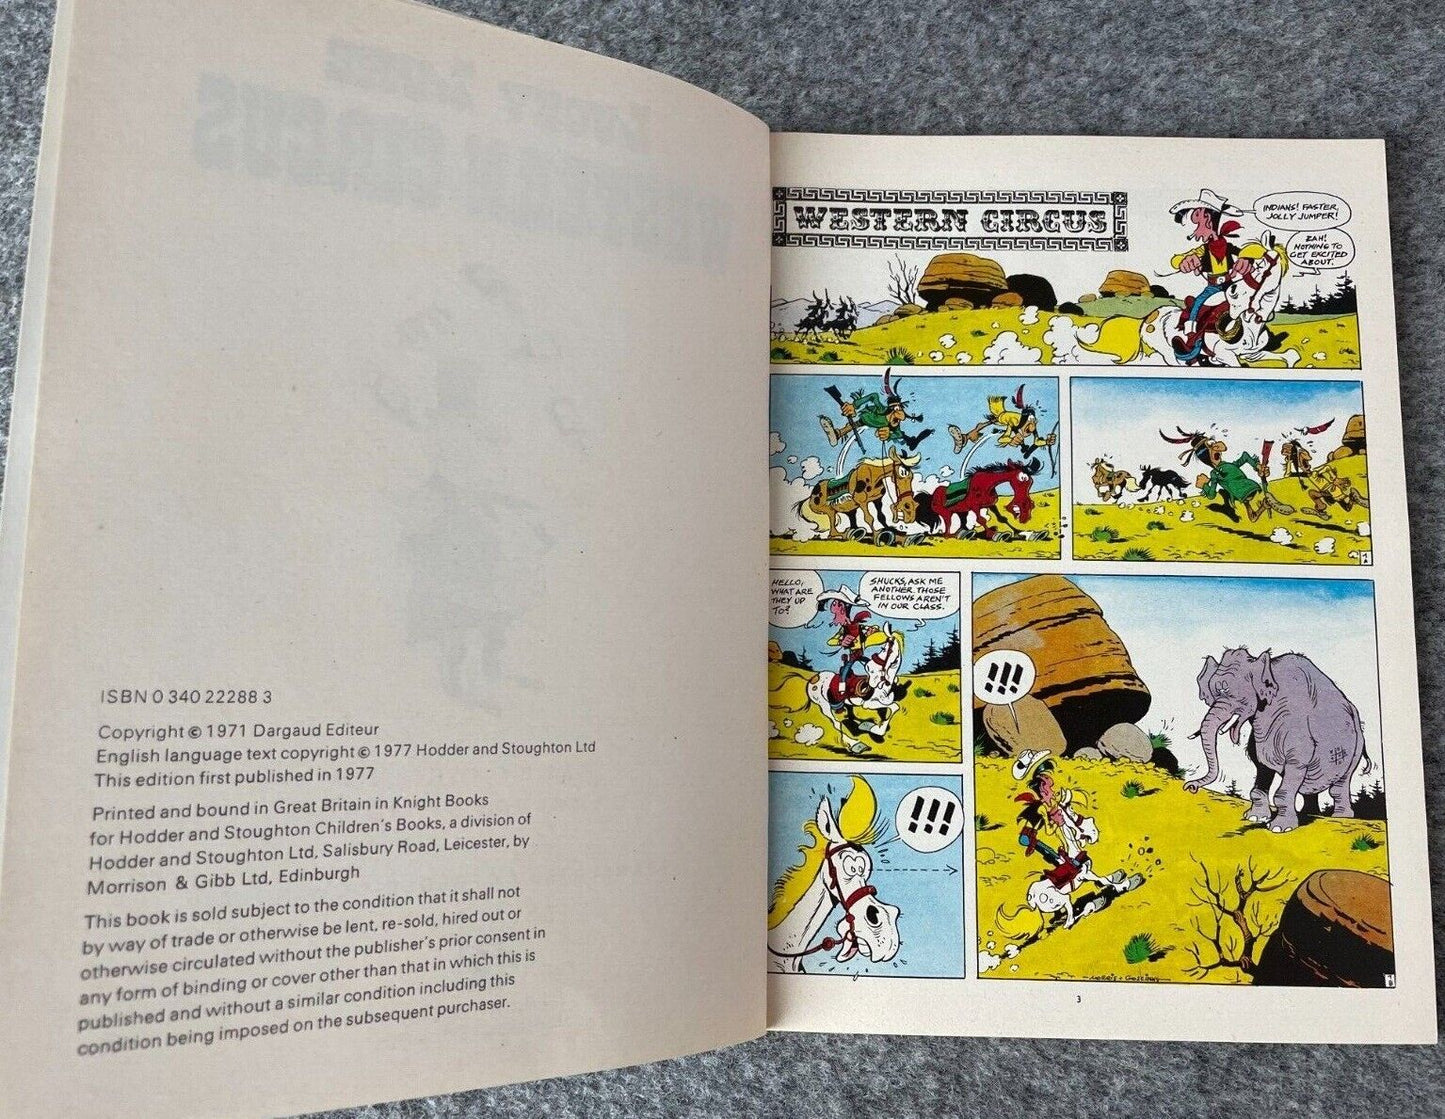 "Western Circus" Mini Vintage A5 Lucky Luke Book - UK Paperback Edition